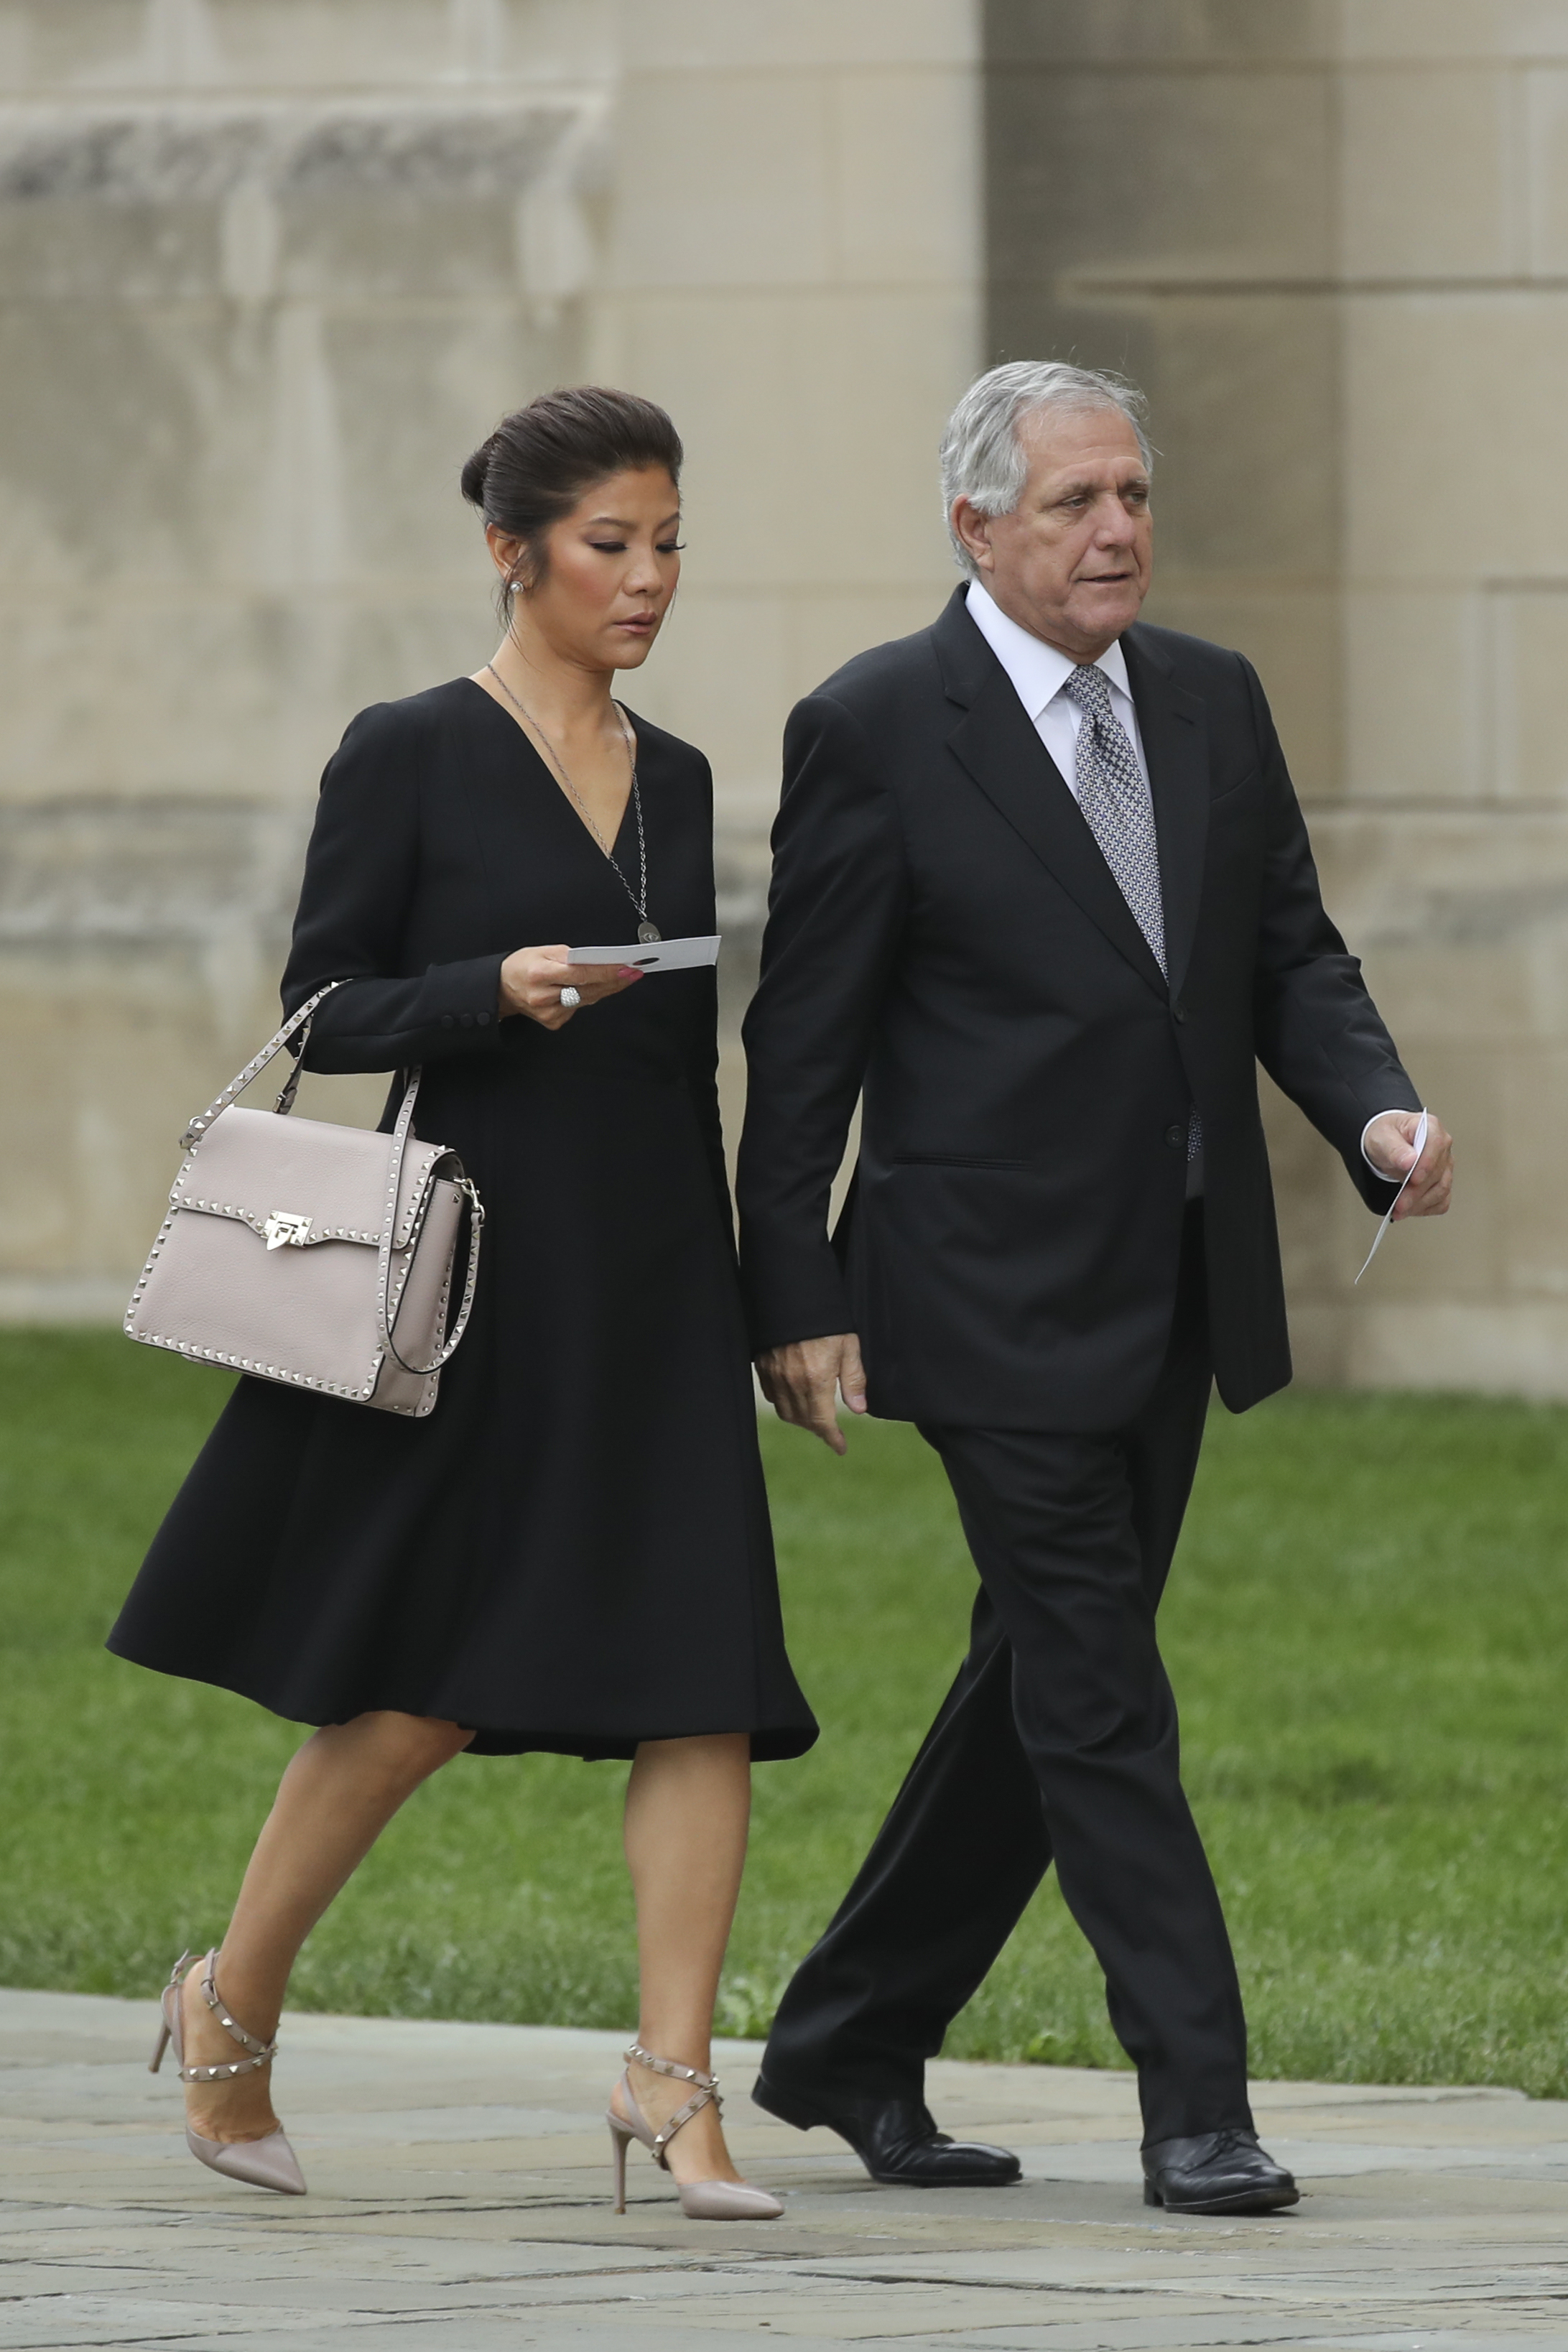 WASHINGTON, DC - SEPTEMBER 1: (L-R) Julie Chen and Les Moonves, chief executive officer of CBS Corporation, arrive at the Washington National Cathedral for the funeral service for the late Senator John McCain, September 1, 2018 in Washington, DC. Former presidents Barack Obama and George W. Bush are set to deliver eulogies for McCain in front of the 2,500 invited guests. McCain will be buried on Sunday at the U.S. Naval Academy Cemetery. (Photo by Drew Angerer/Getty Images)